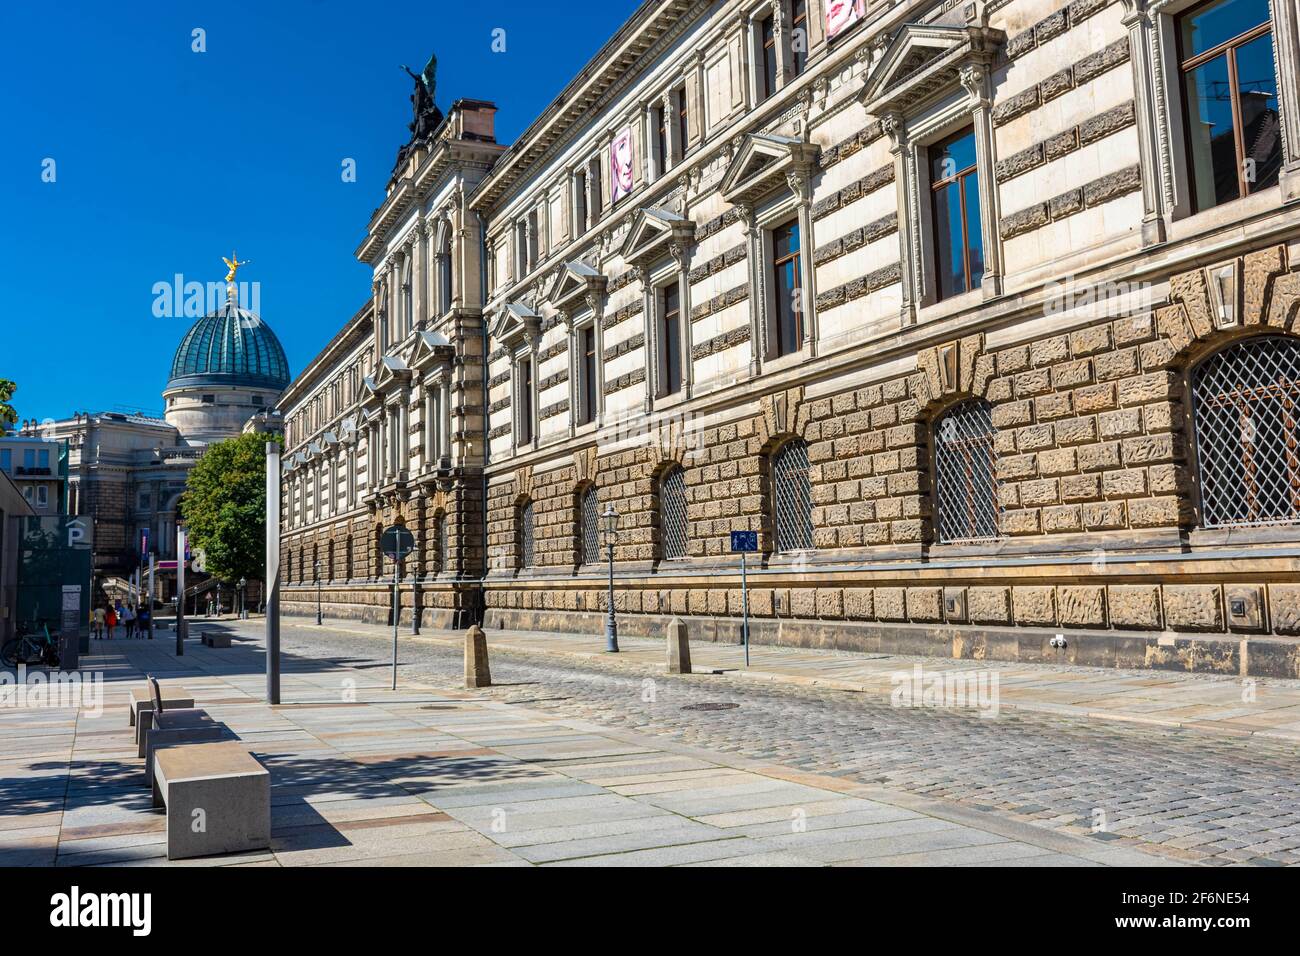 DRESDEN, GERMANY, 23 JULY 2020: palace of justice Stock Photo